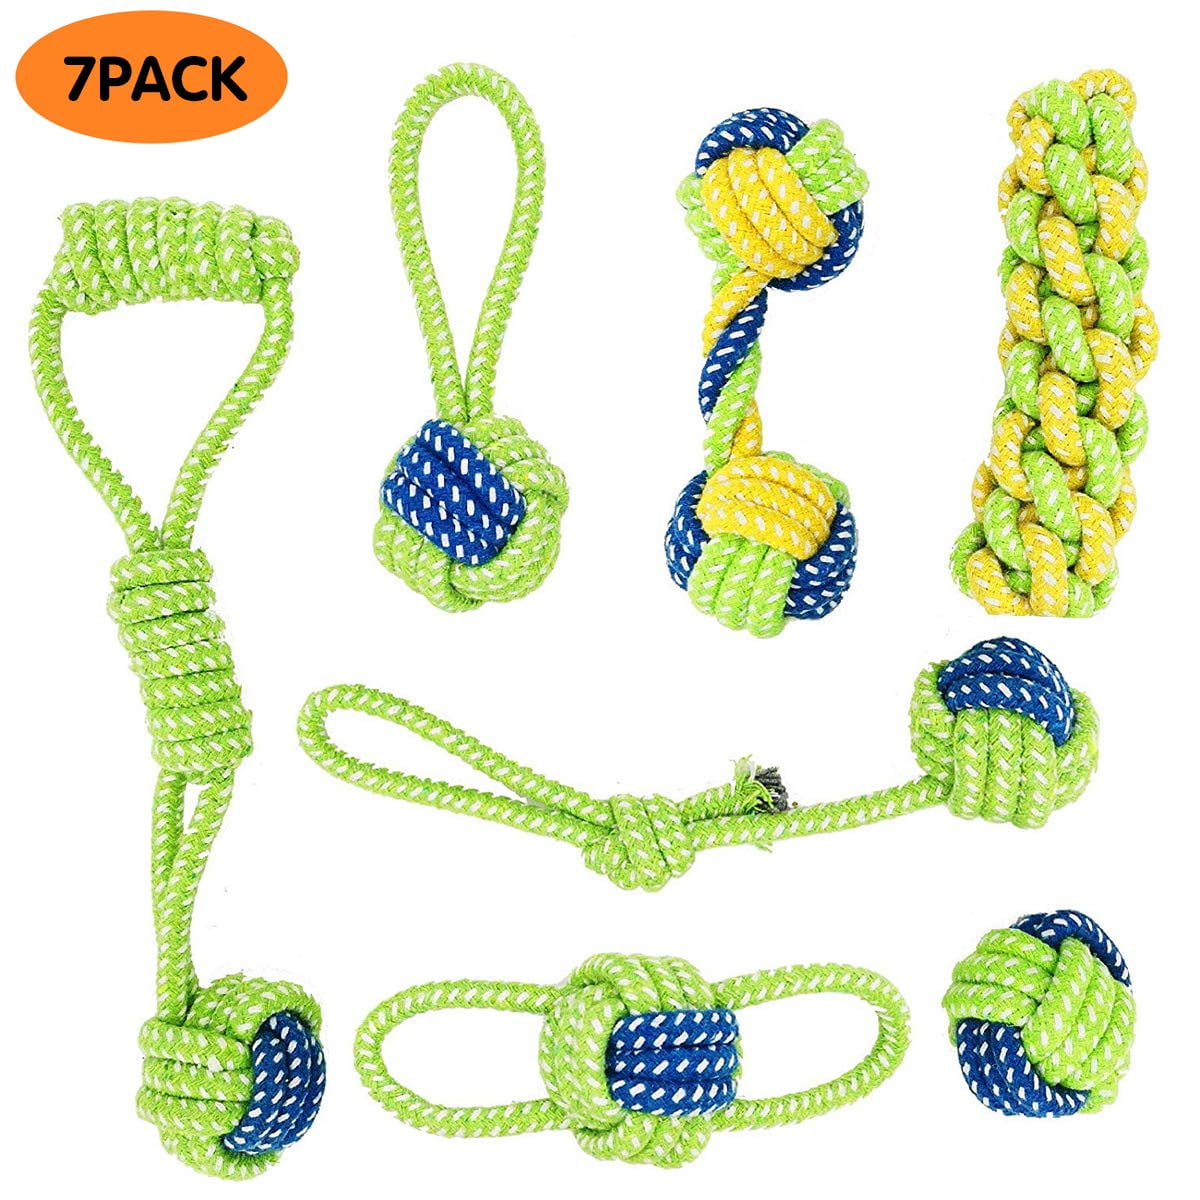 100% Cotton Durable Pet Chew Tooth Cleaning Toys Interactive Play Prevents Boredom & Relieves Stress 5 Pack Christmas Dog Rope Toys Set for Small Medium Dogs Puppy Training Gold Wrap 